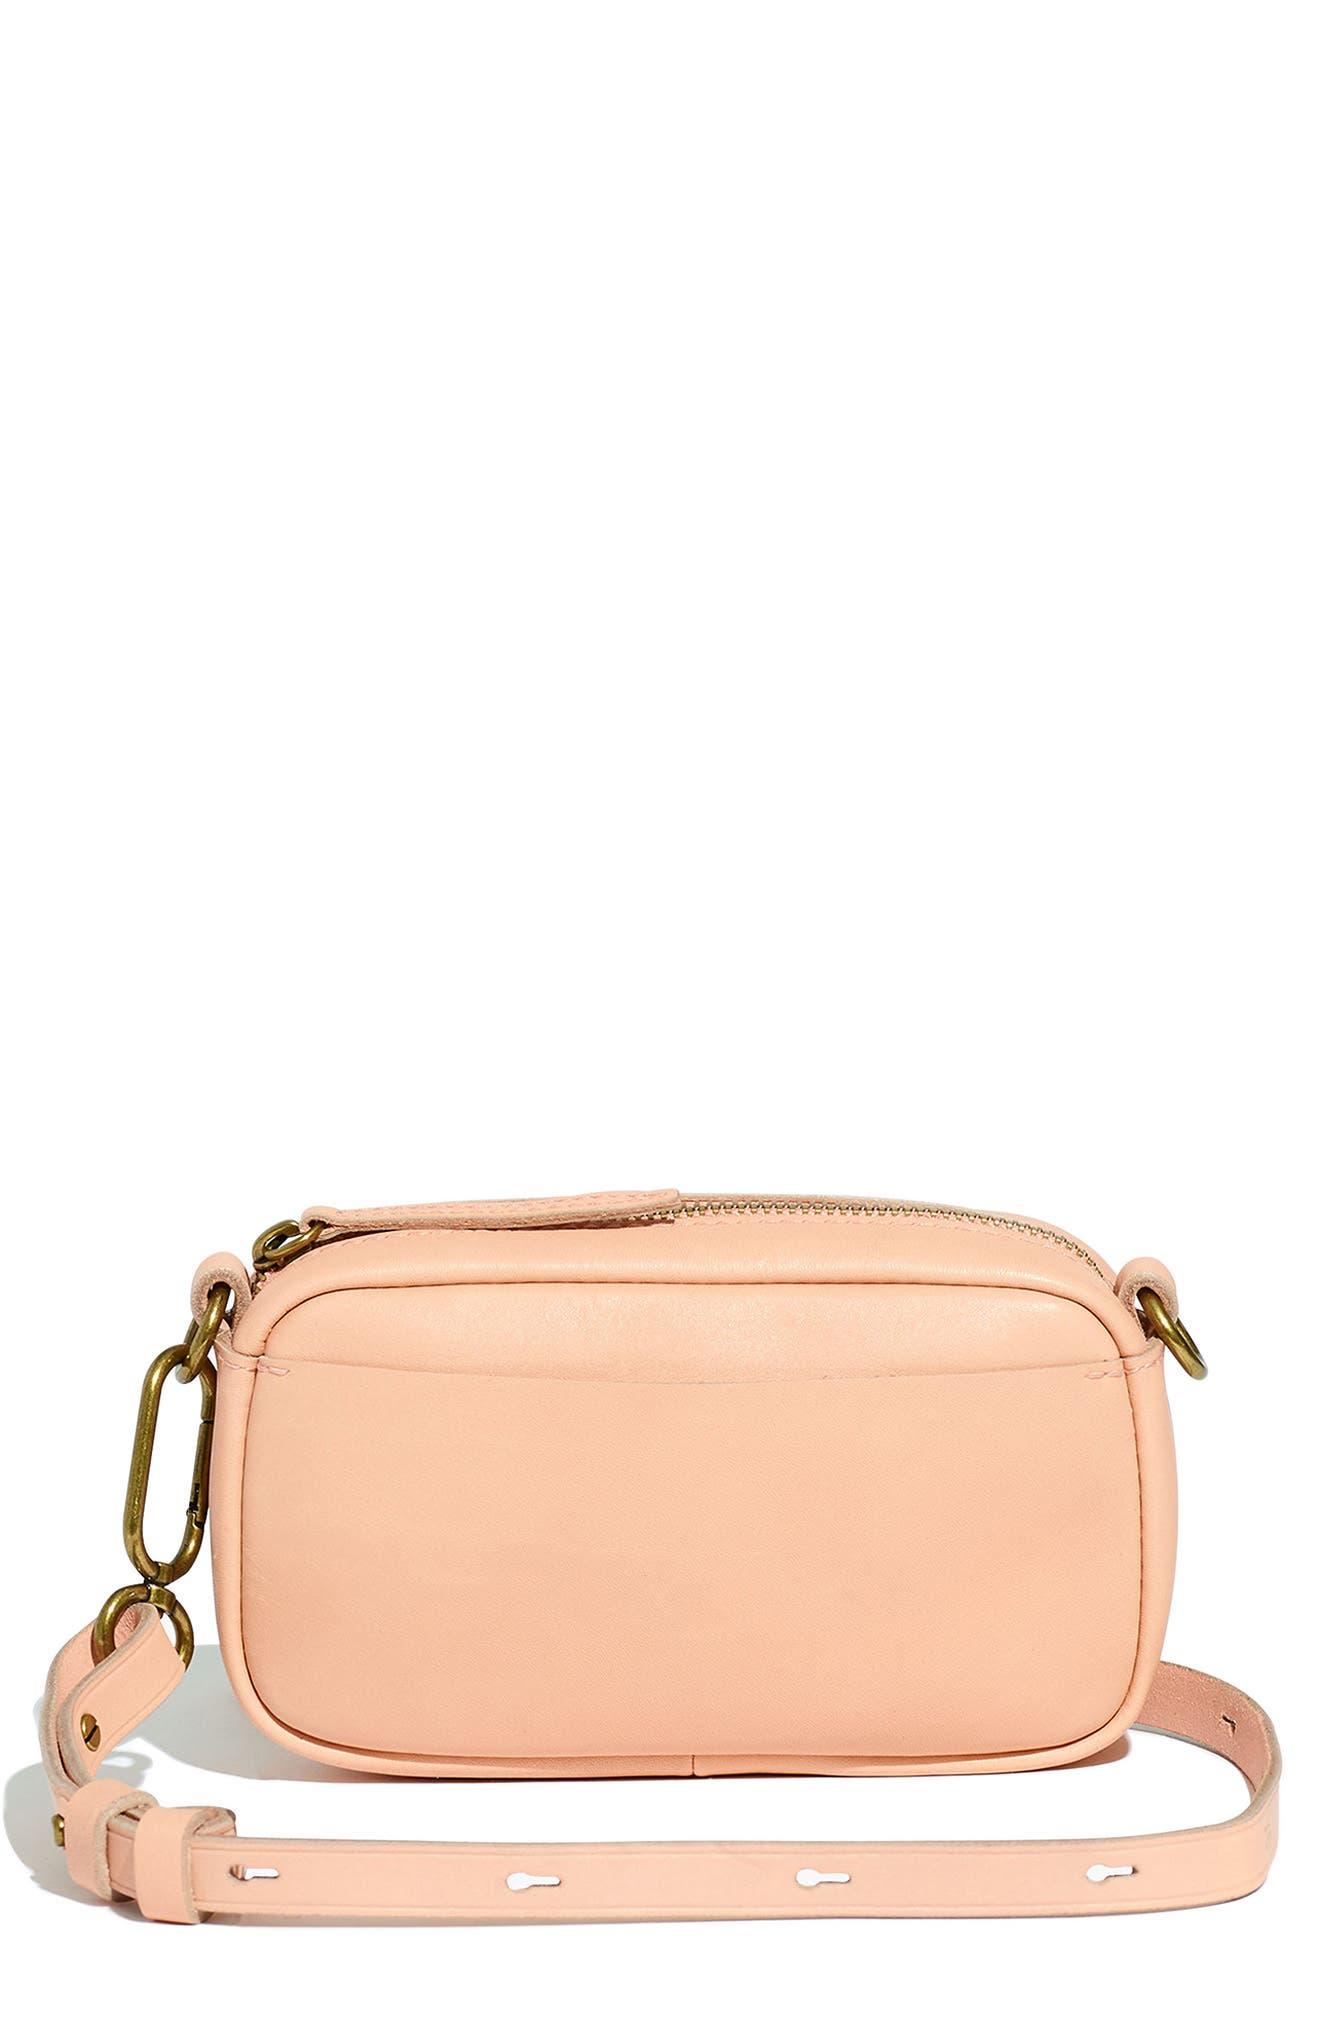 Madewell Mini The Leather Carabiner Crossbody Bag in Natural | Lyst